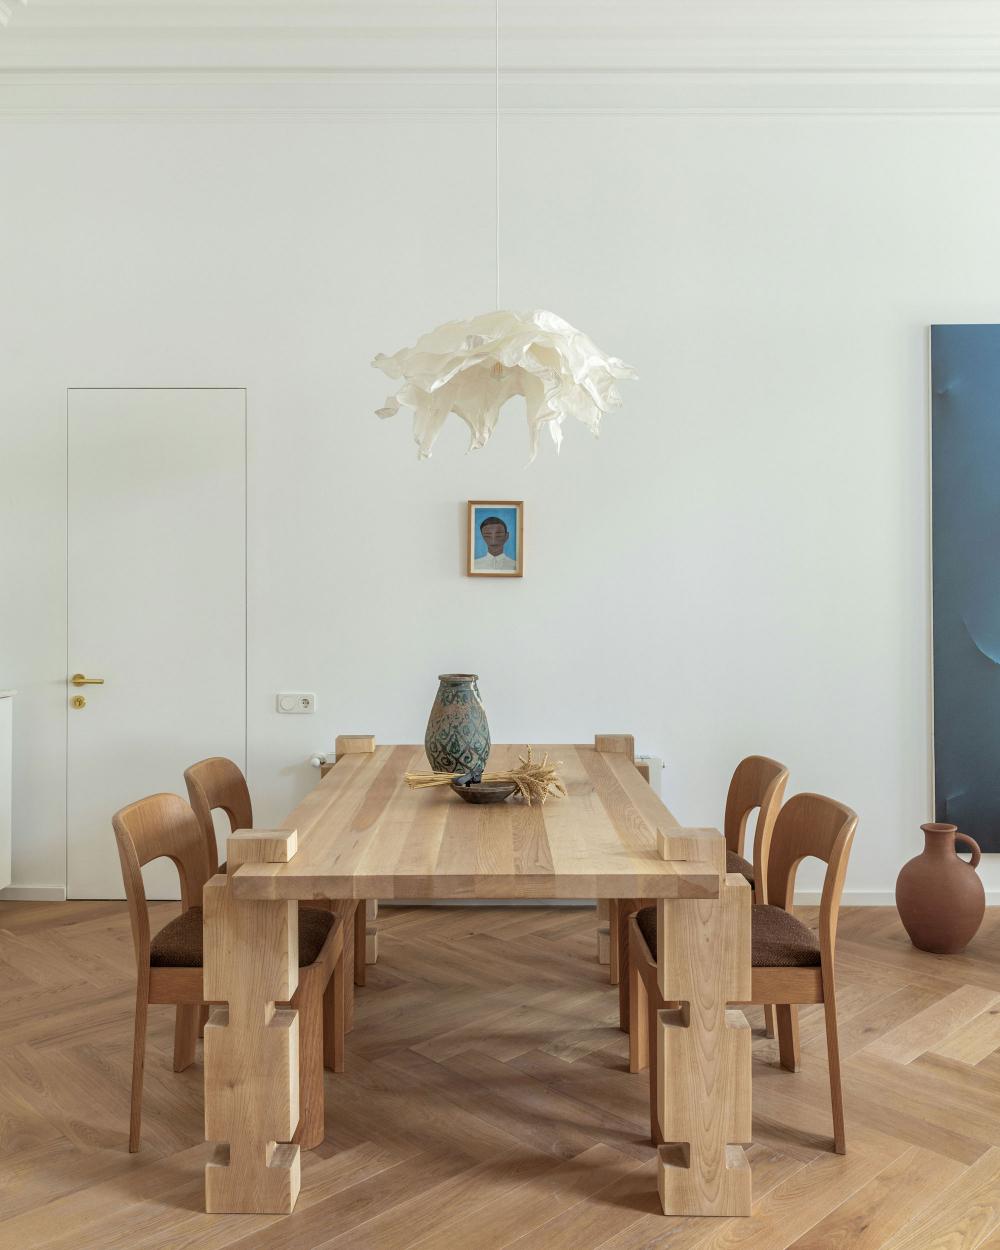 Element Dining Table by Nana Zaalishvili
Dimensions: W 120 x D 35 x H 80 cm
Materials: Century Old Oak

Made of solid wood, this coffee table is one of the pieces of the ‘Element’ collection influenced by the Georgian Oda house and the architect